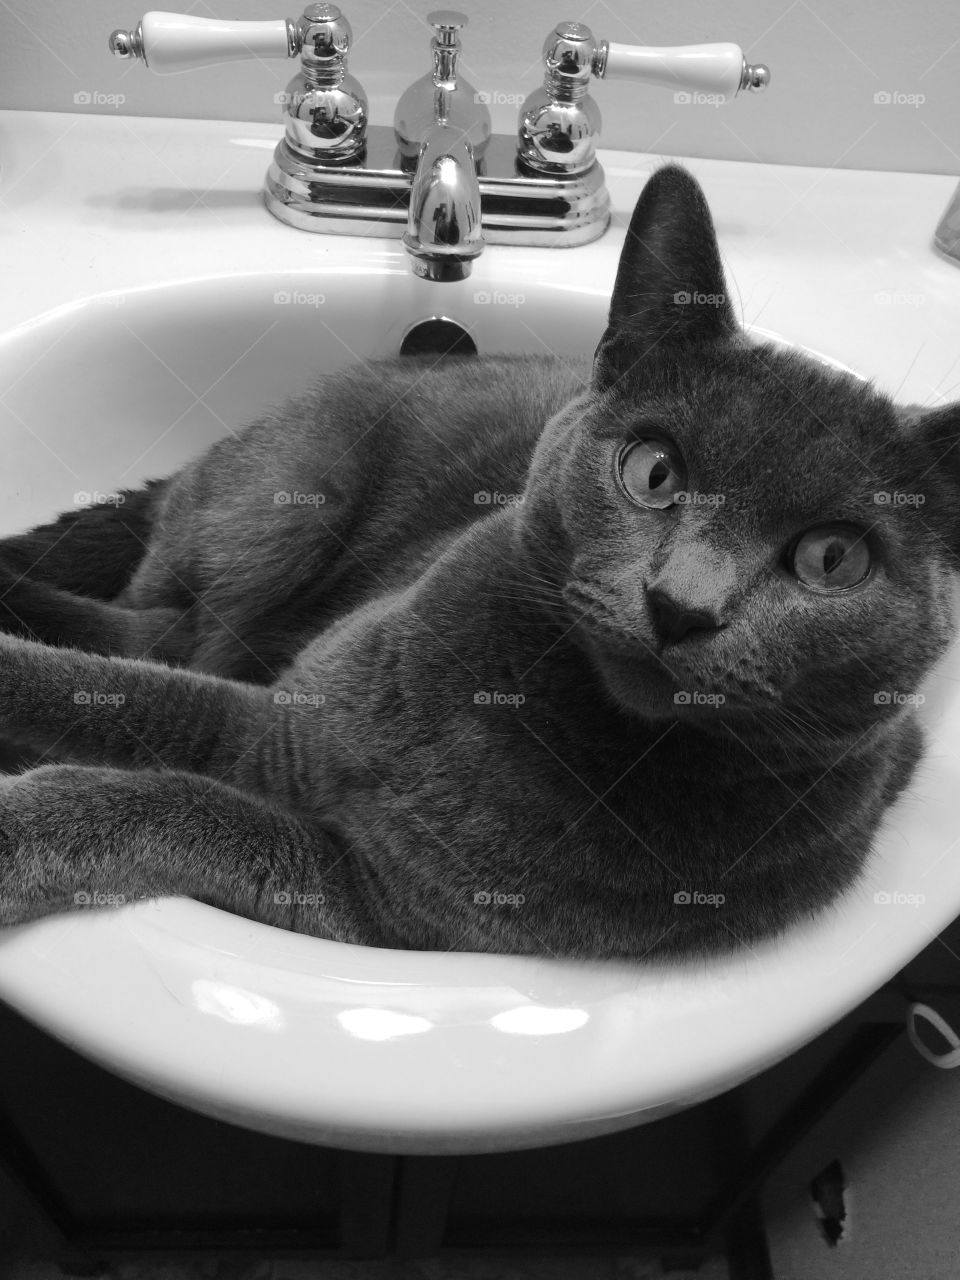 Chilling in the sink 